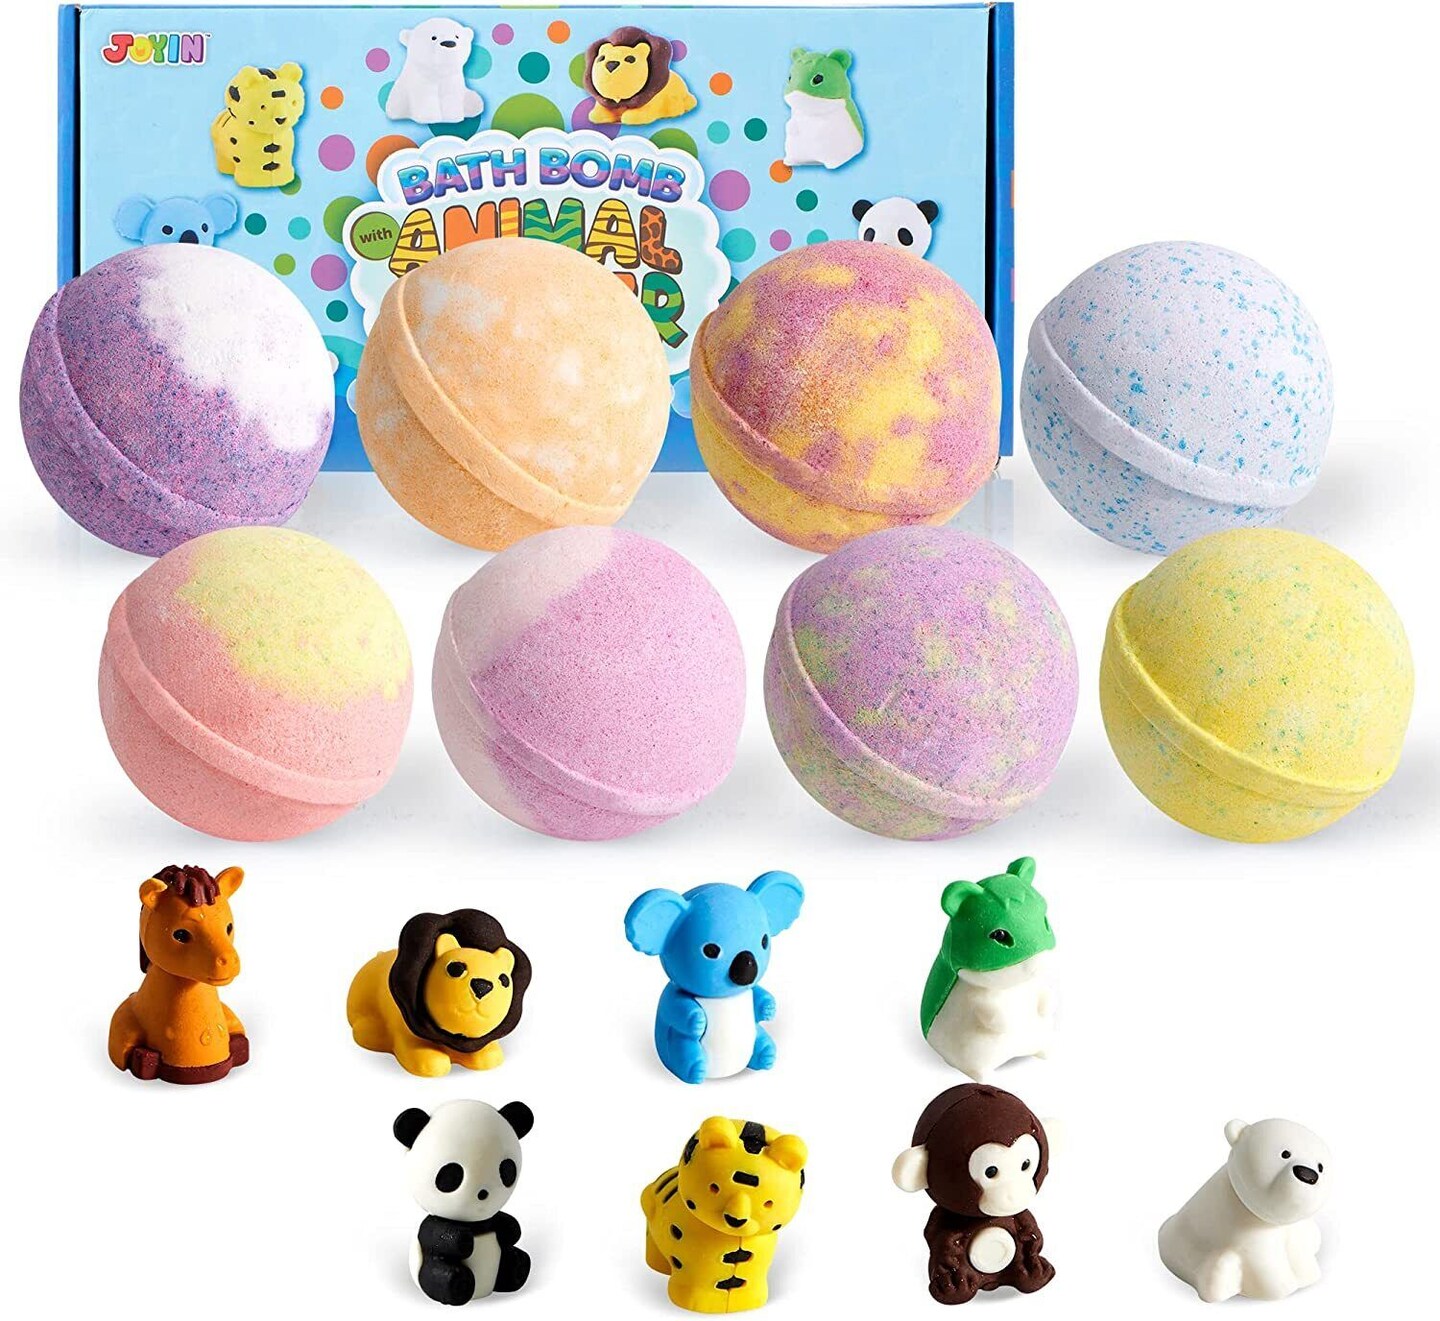 Bubble Bath Bombs for Kids with Animal Figures 16 packs